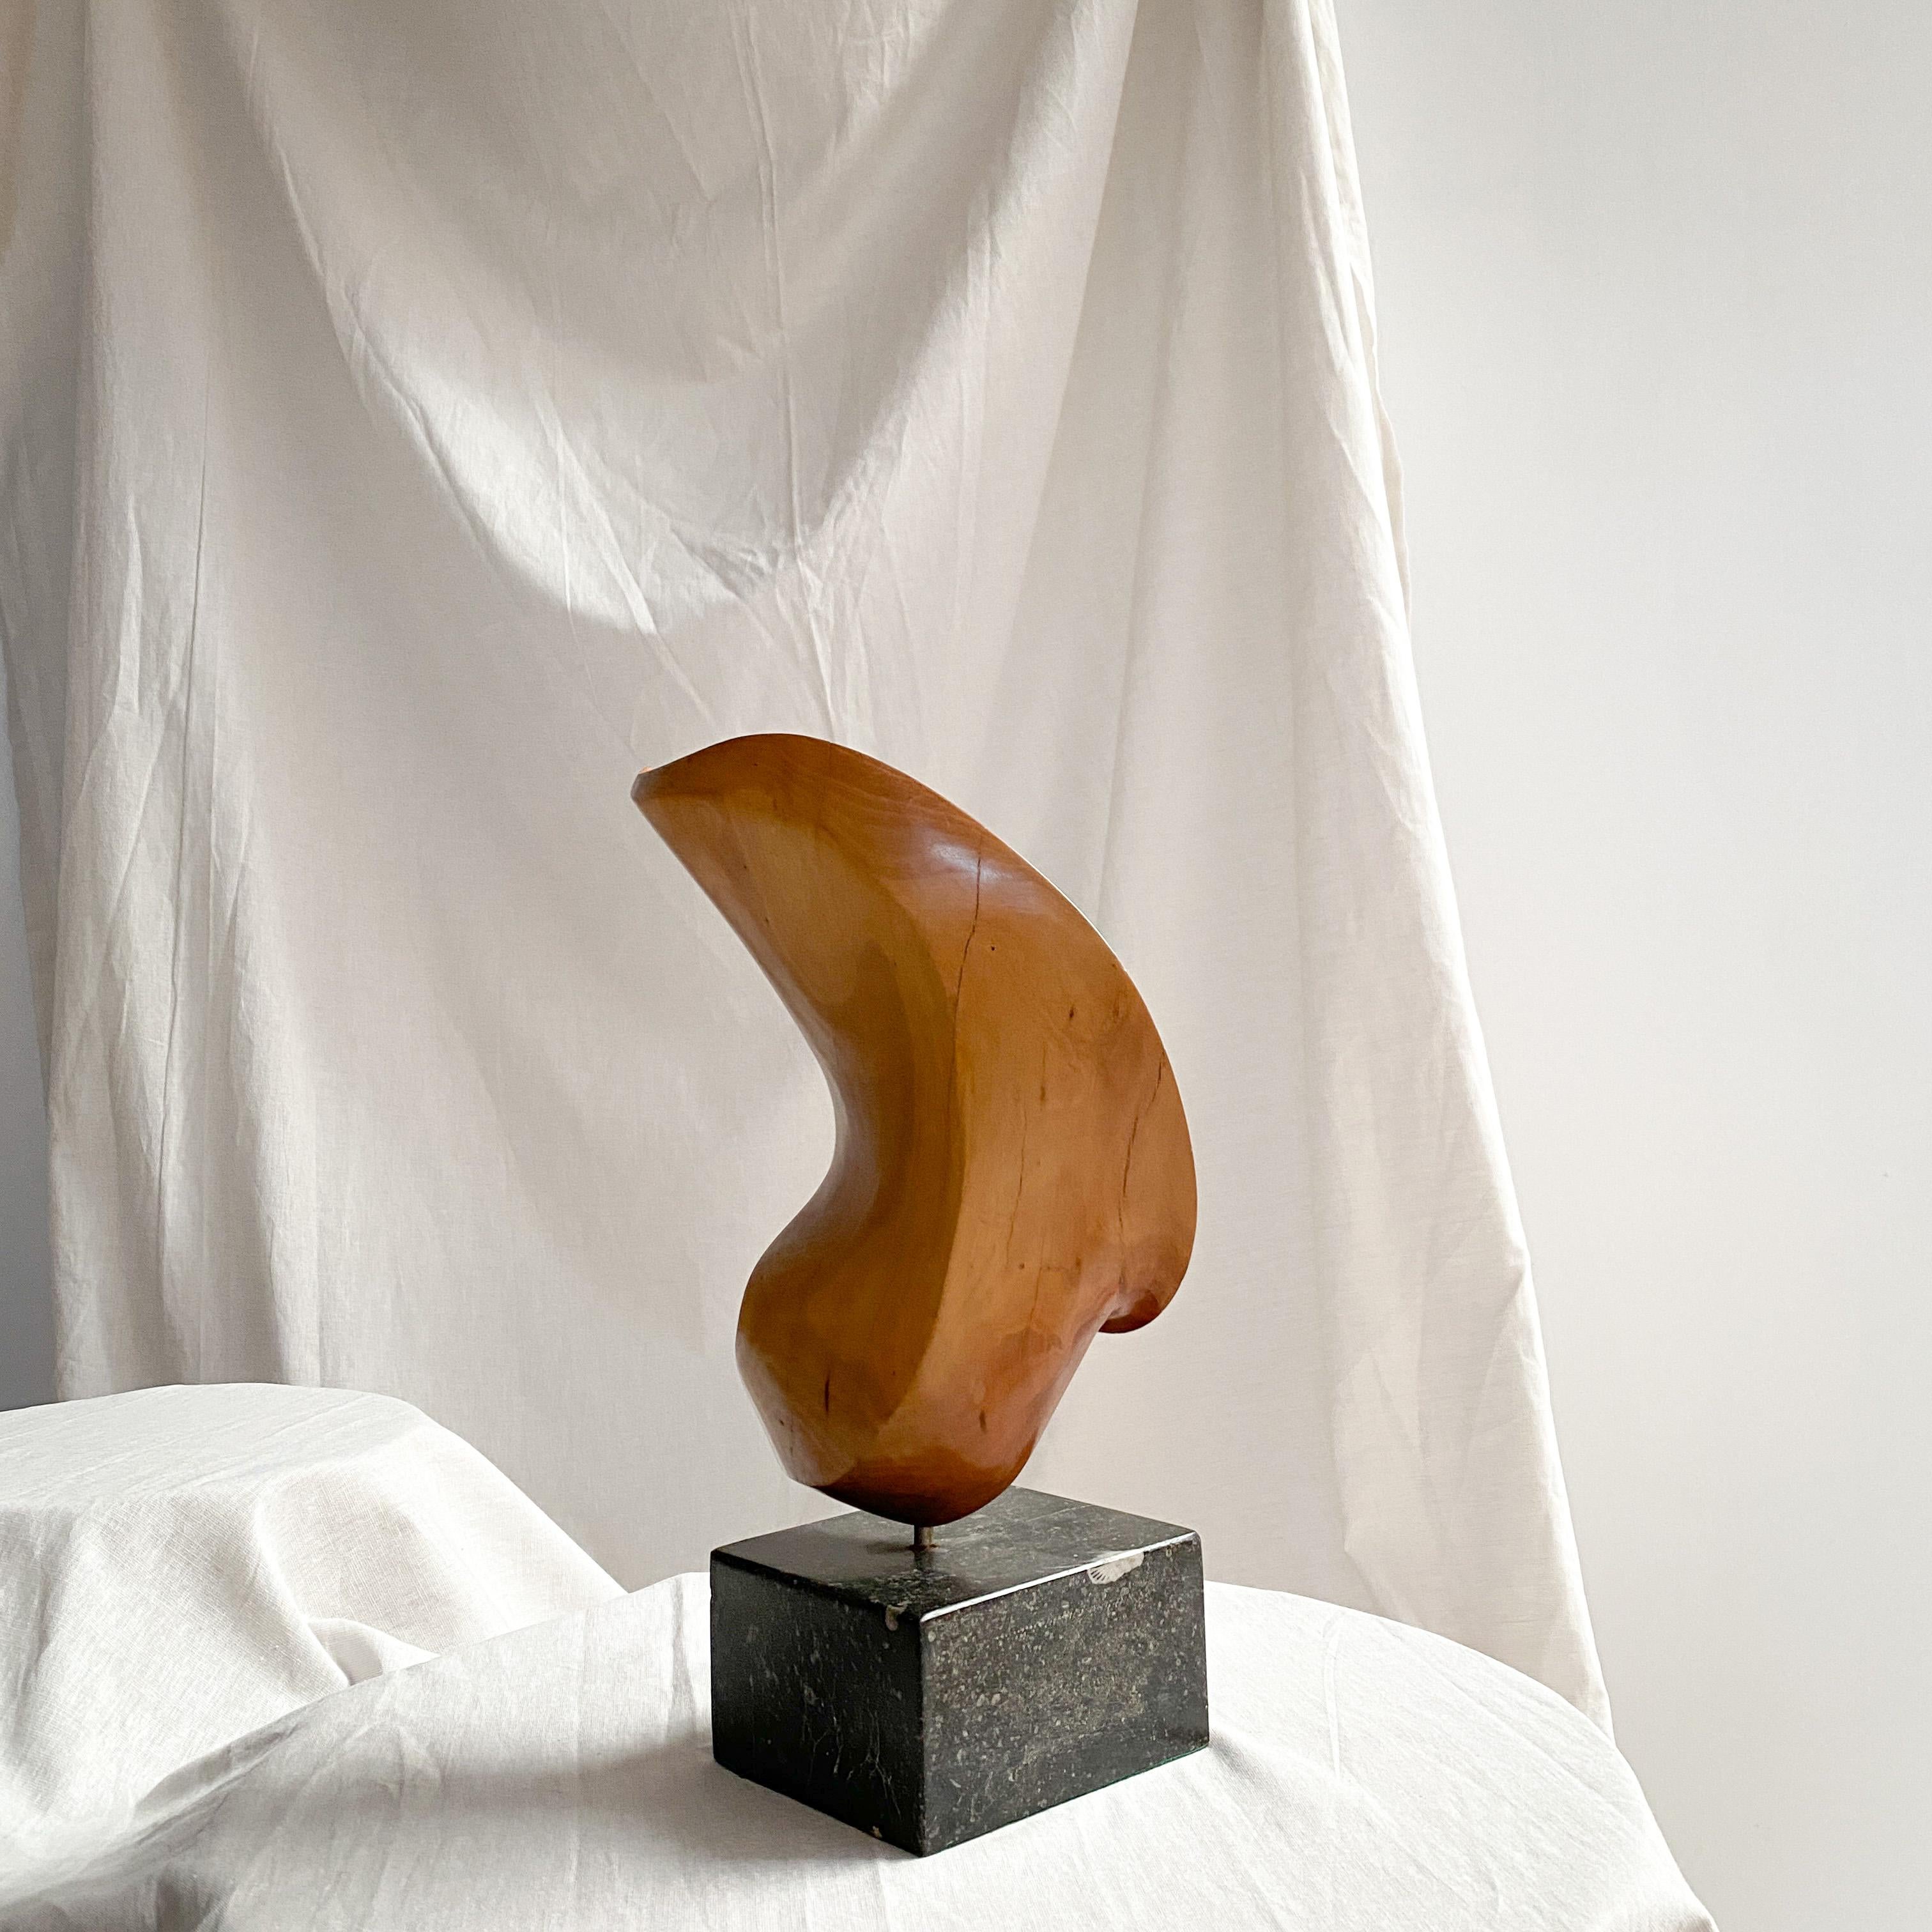 Dutch ABSTRACT MODERNIST hand carved WOODEN SCULPTURE, 1970S WAVE